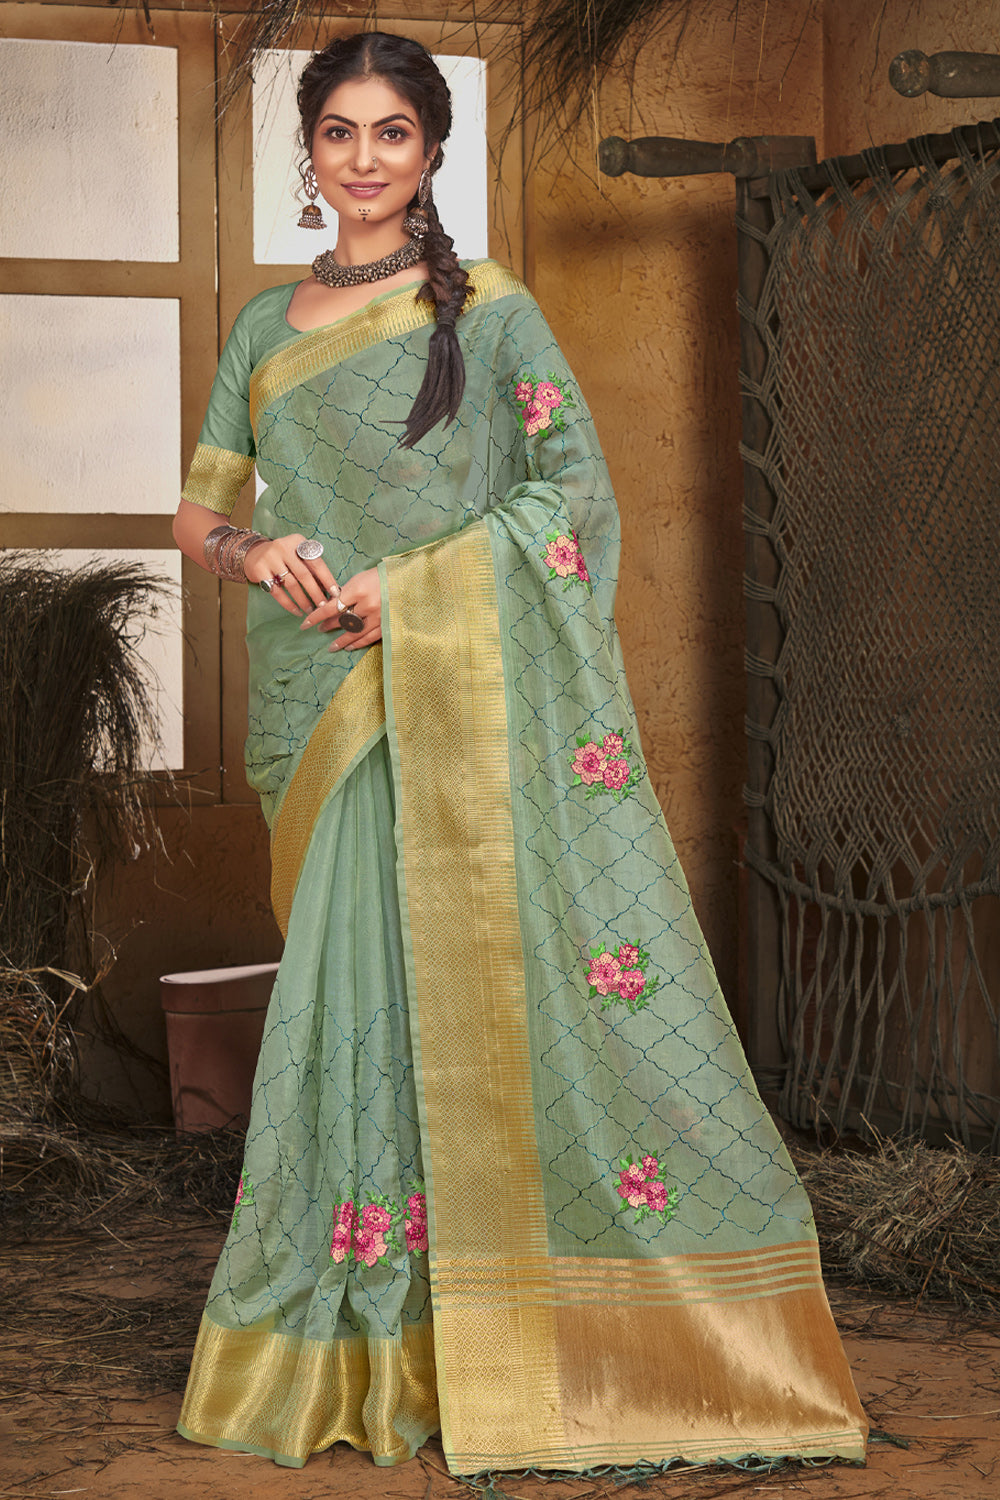 Women's Turquoise Organza Embroidery With Stone Work Traditional Tassle Saree - Sangam Prints